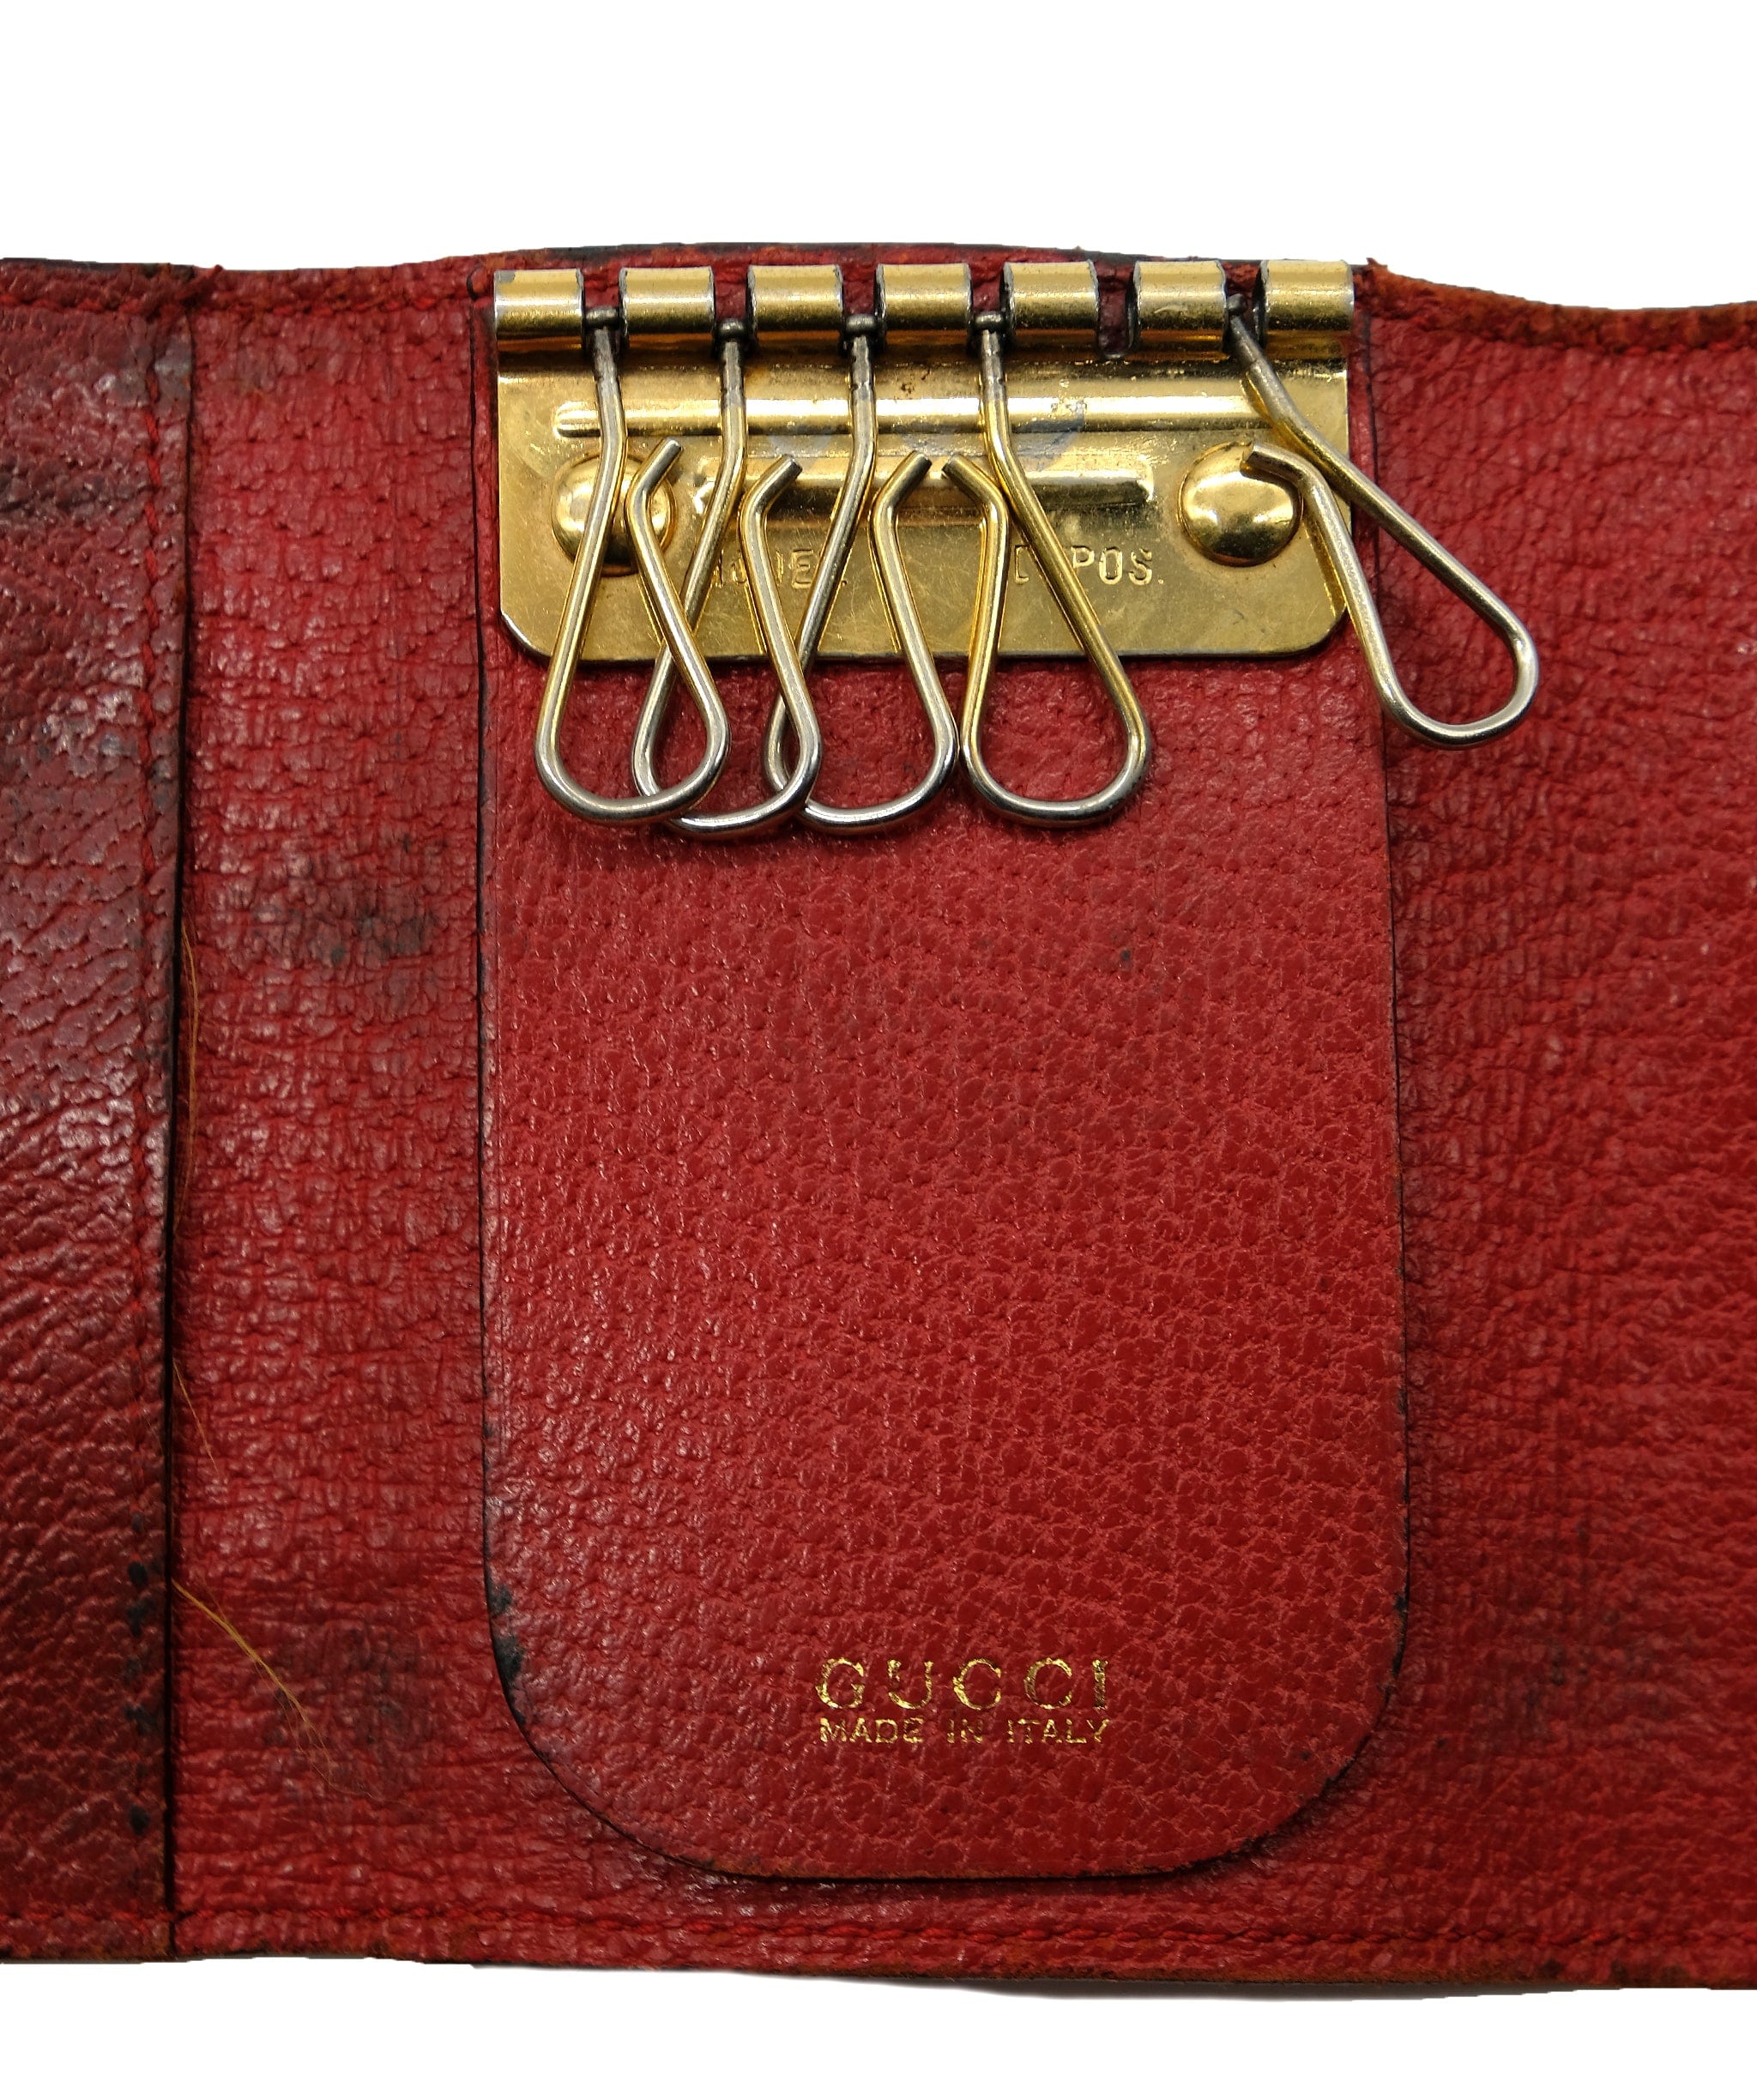 Gucci Gucci Key Holder Red Leather RJC2932